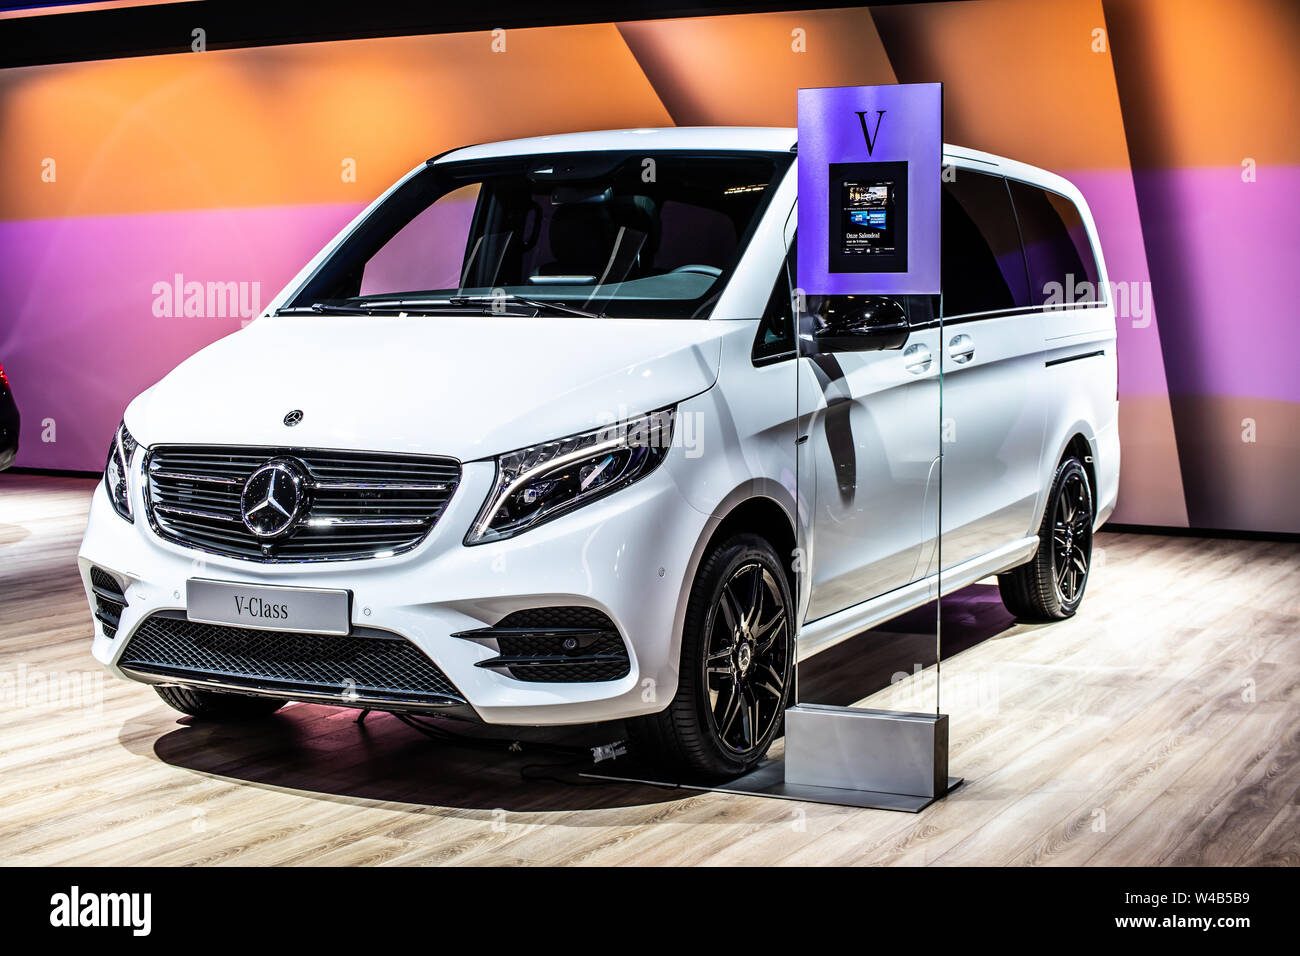 Mercedes Benz V Class High Resolution Stock Photography And Images Alamy